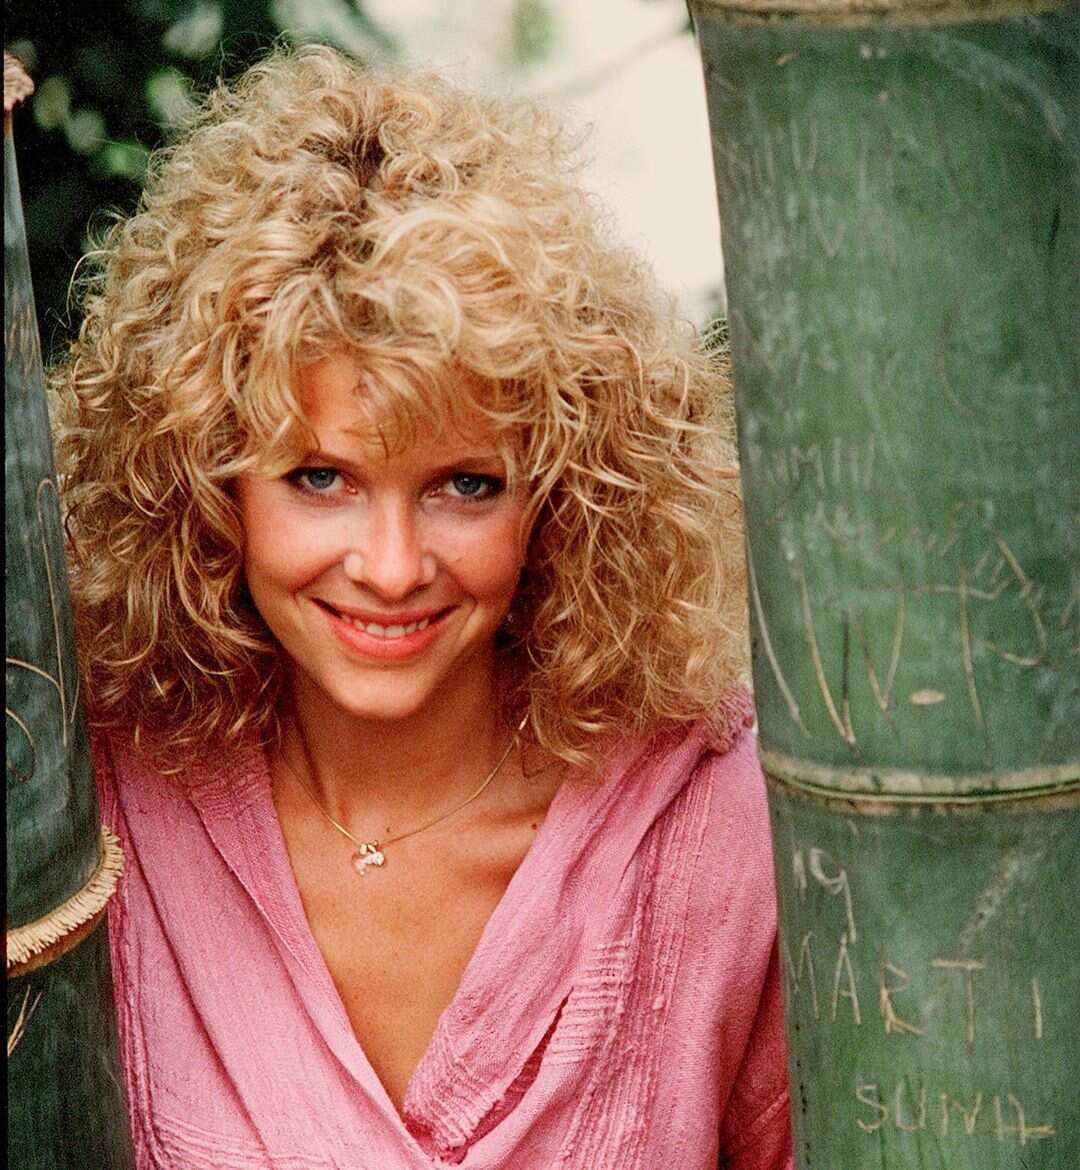 Capshaw pictures kate Kate Capshaw,